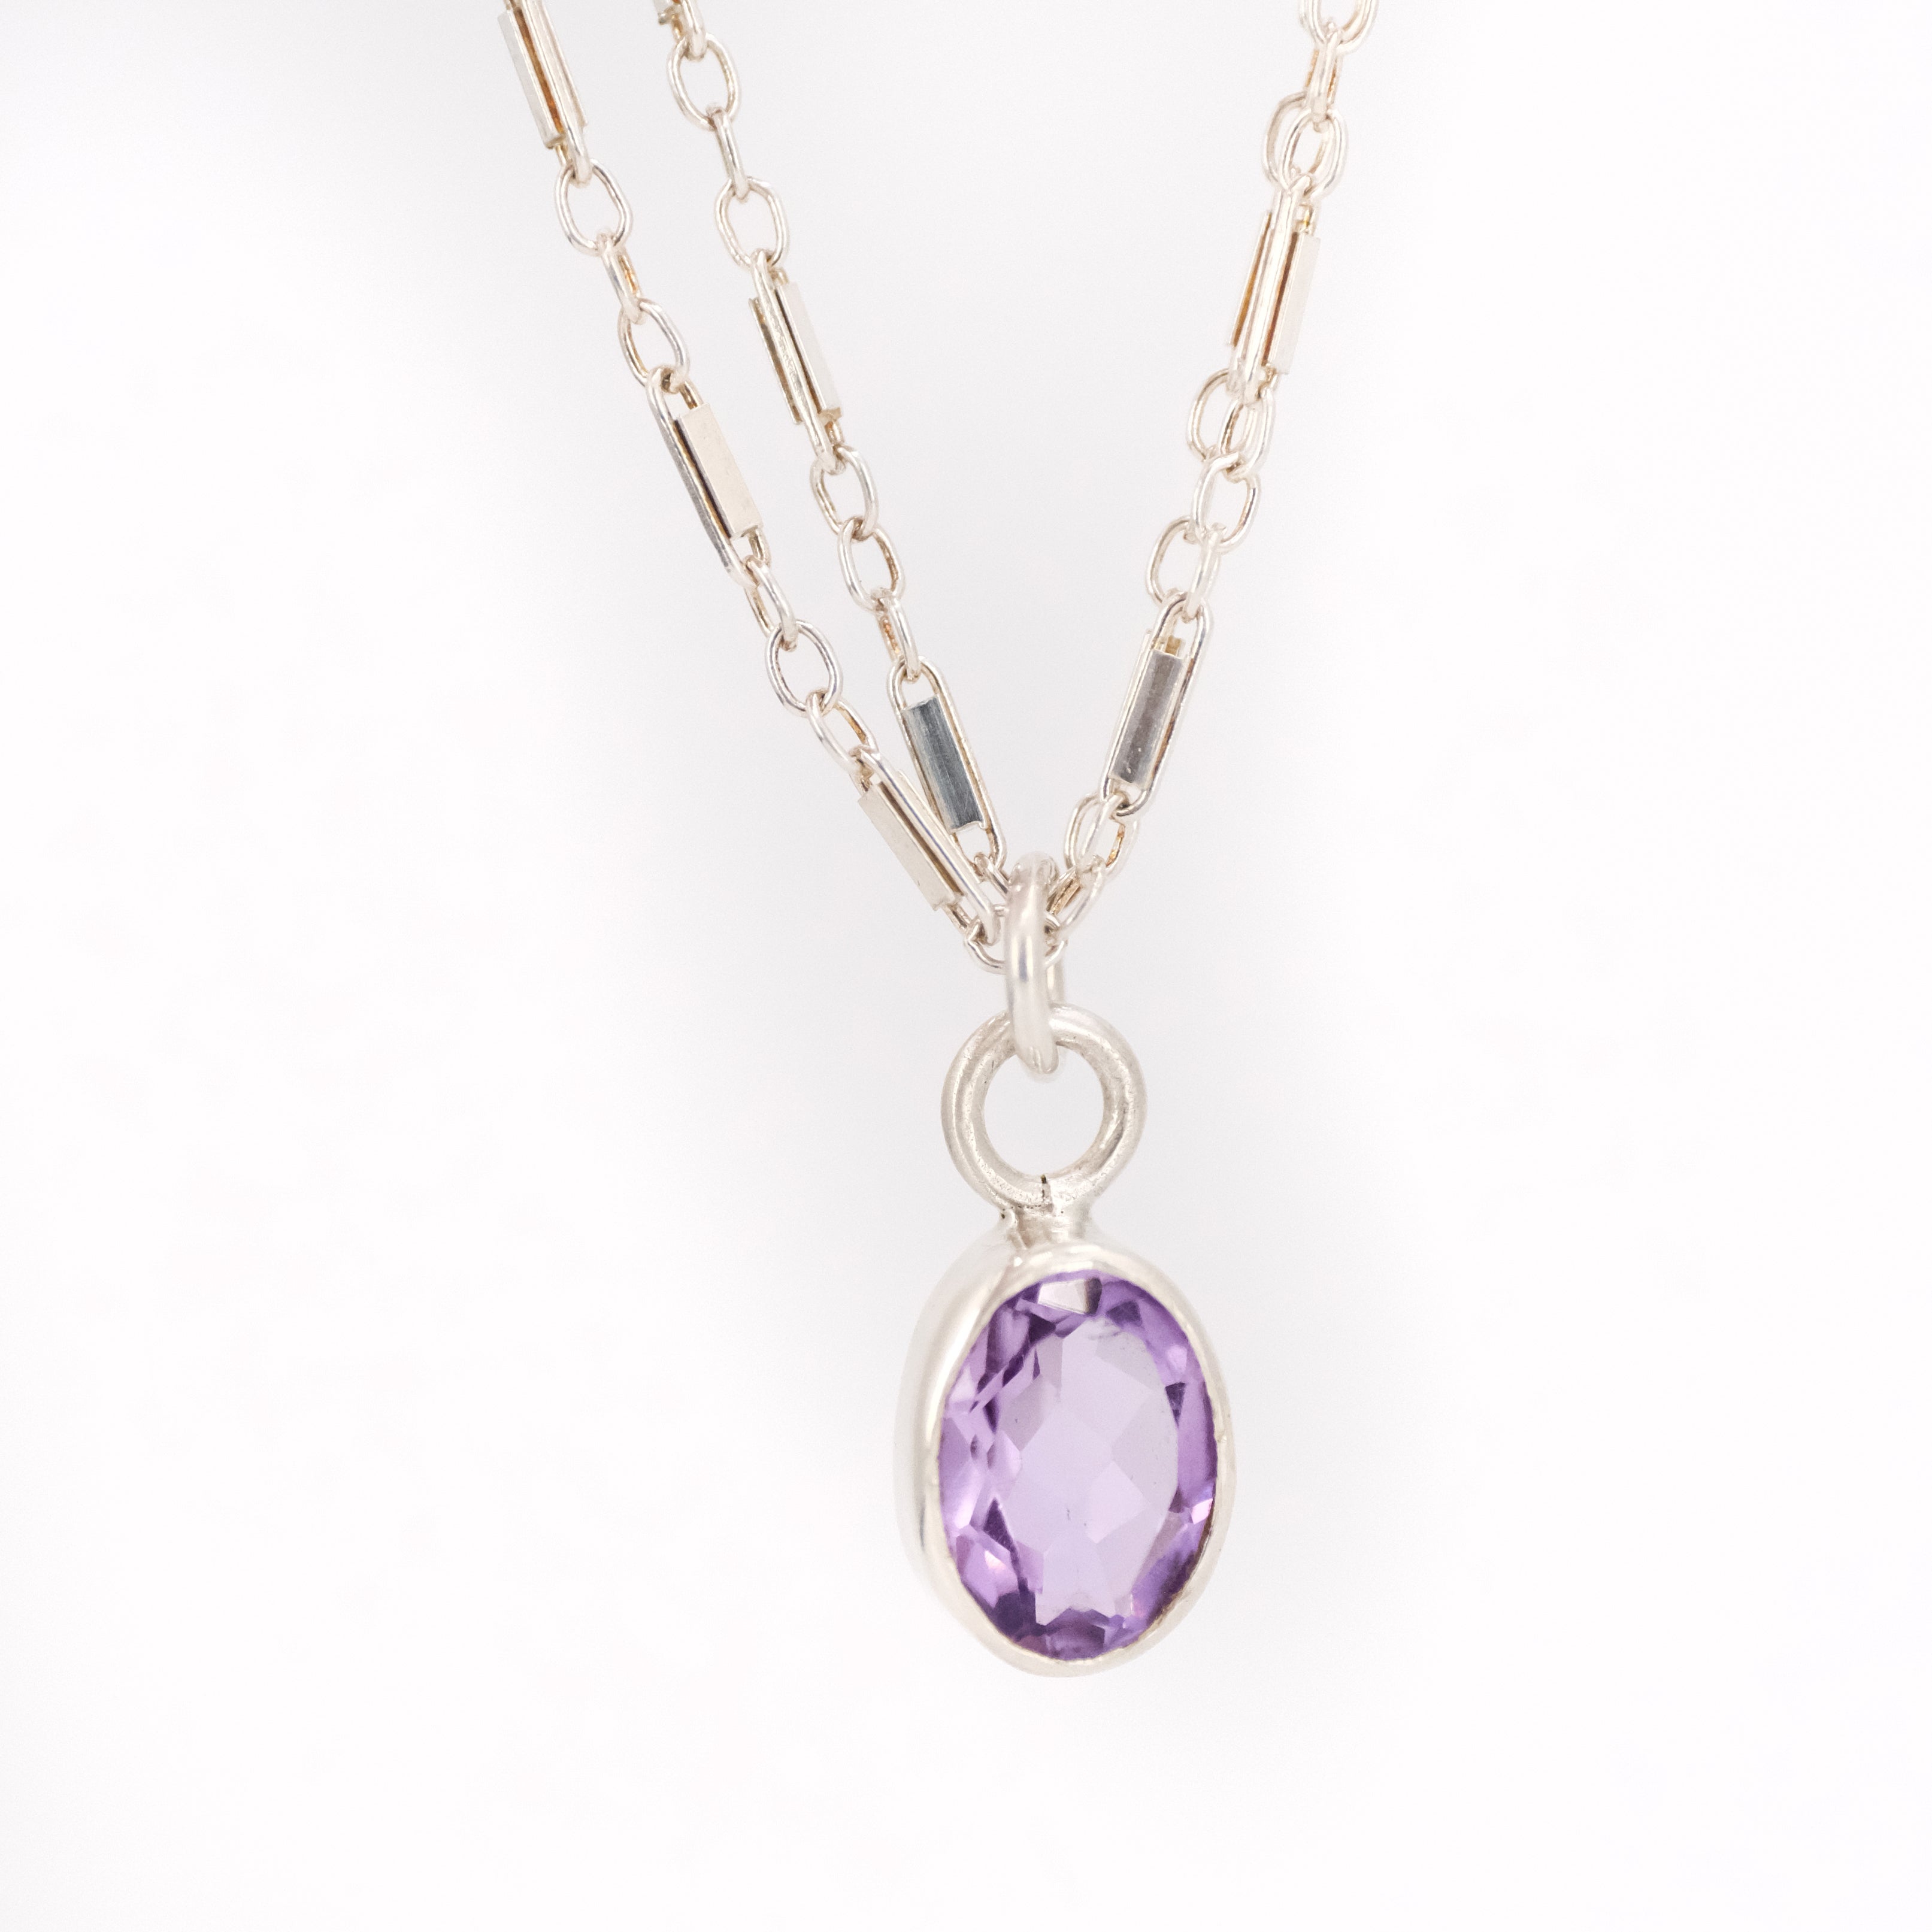 Amethyst + Sterling Kyoho Necklace - One of a Kind